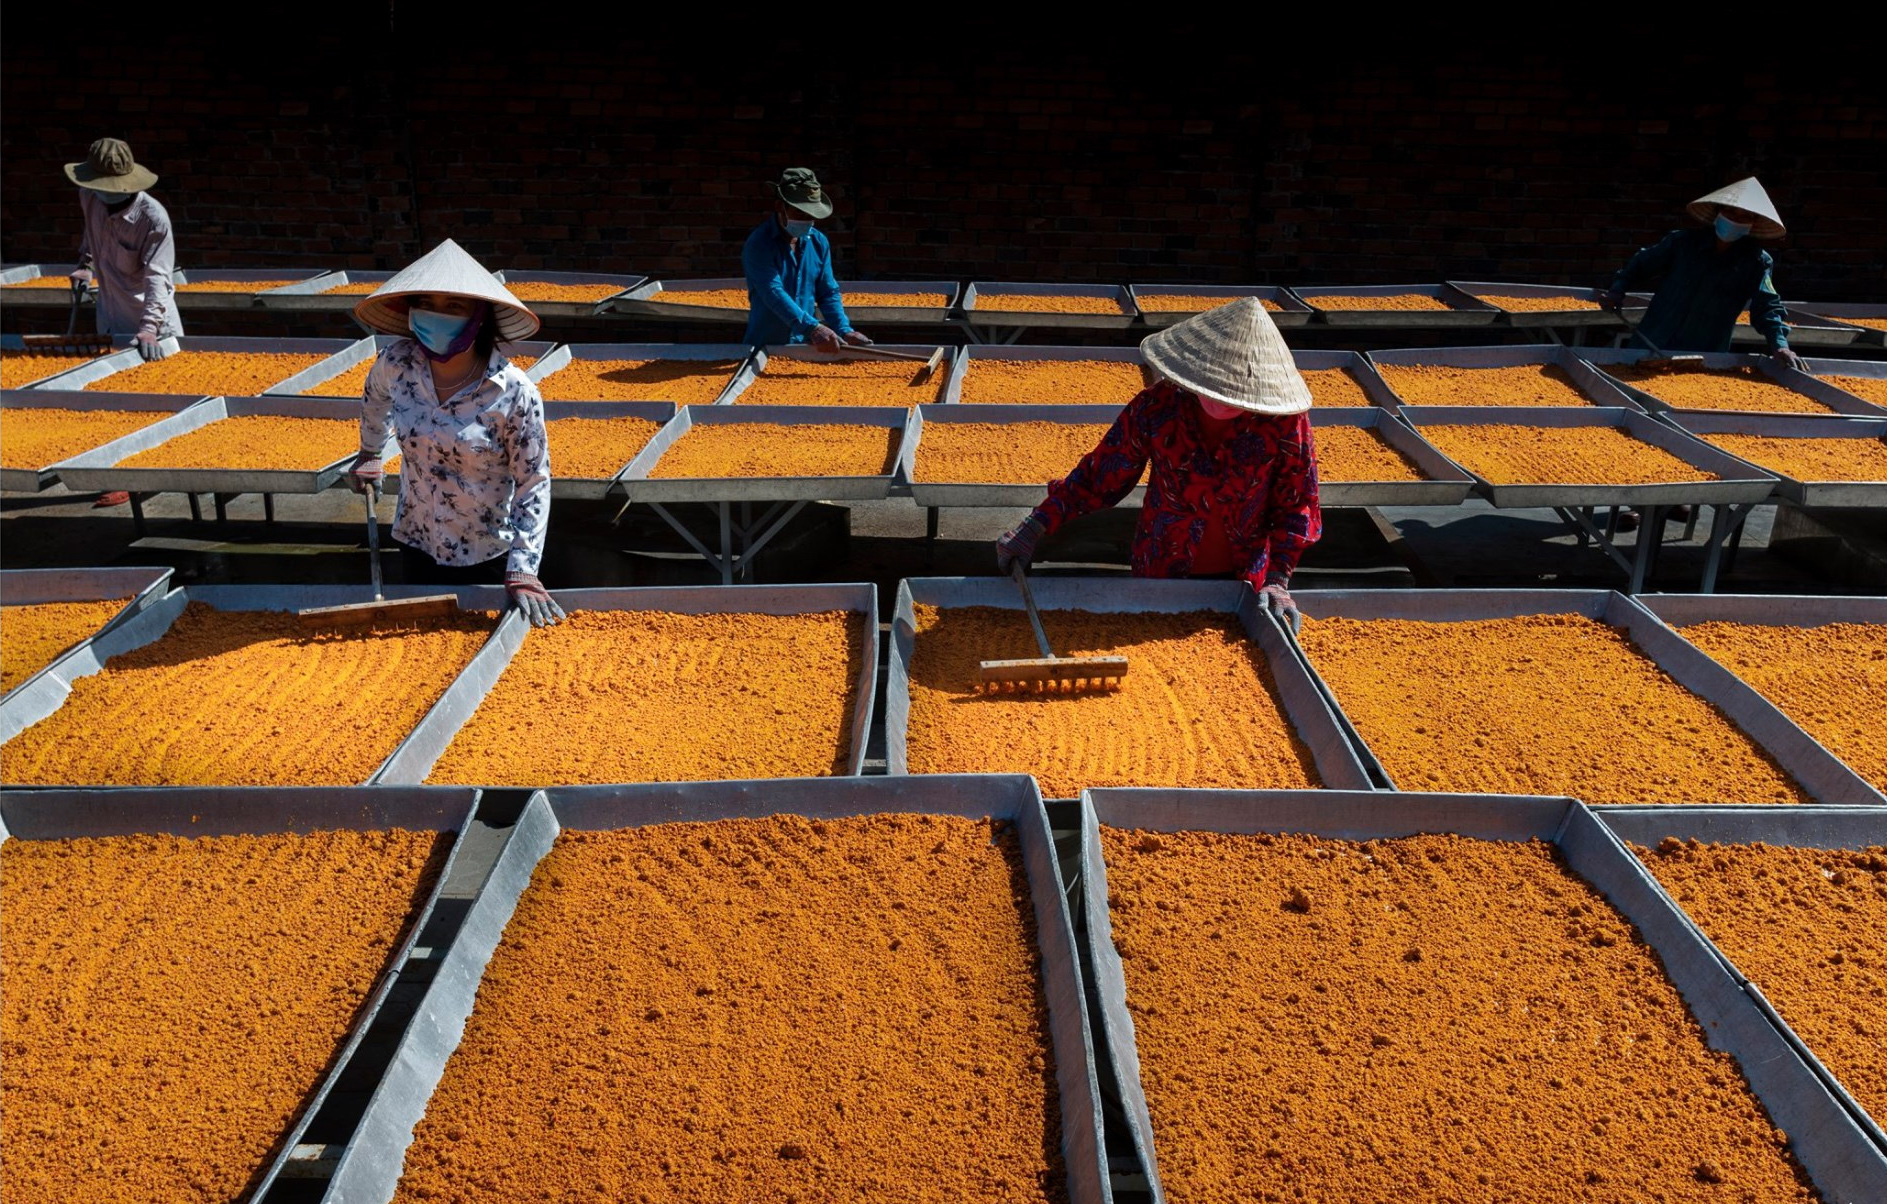 Making of Tay Ninh chili salt recognized as Vietnam’s national intangible cultural heritage